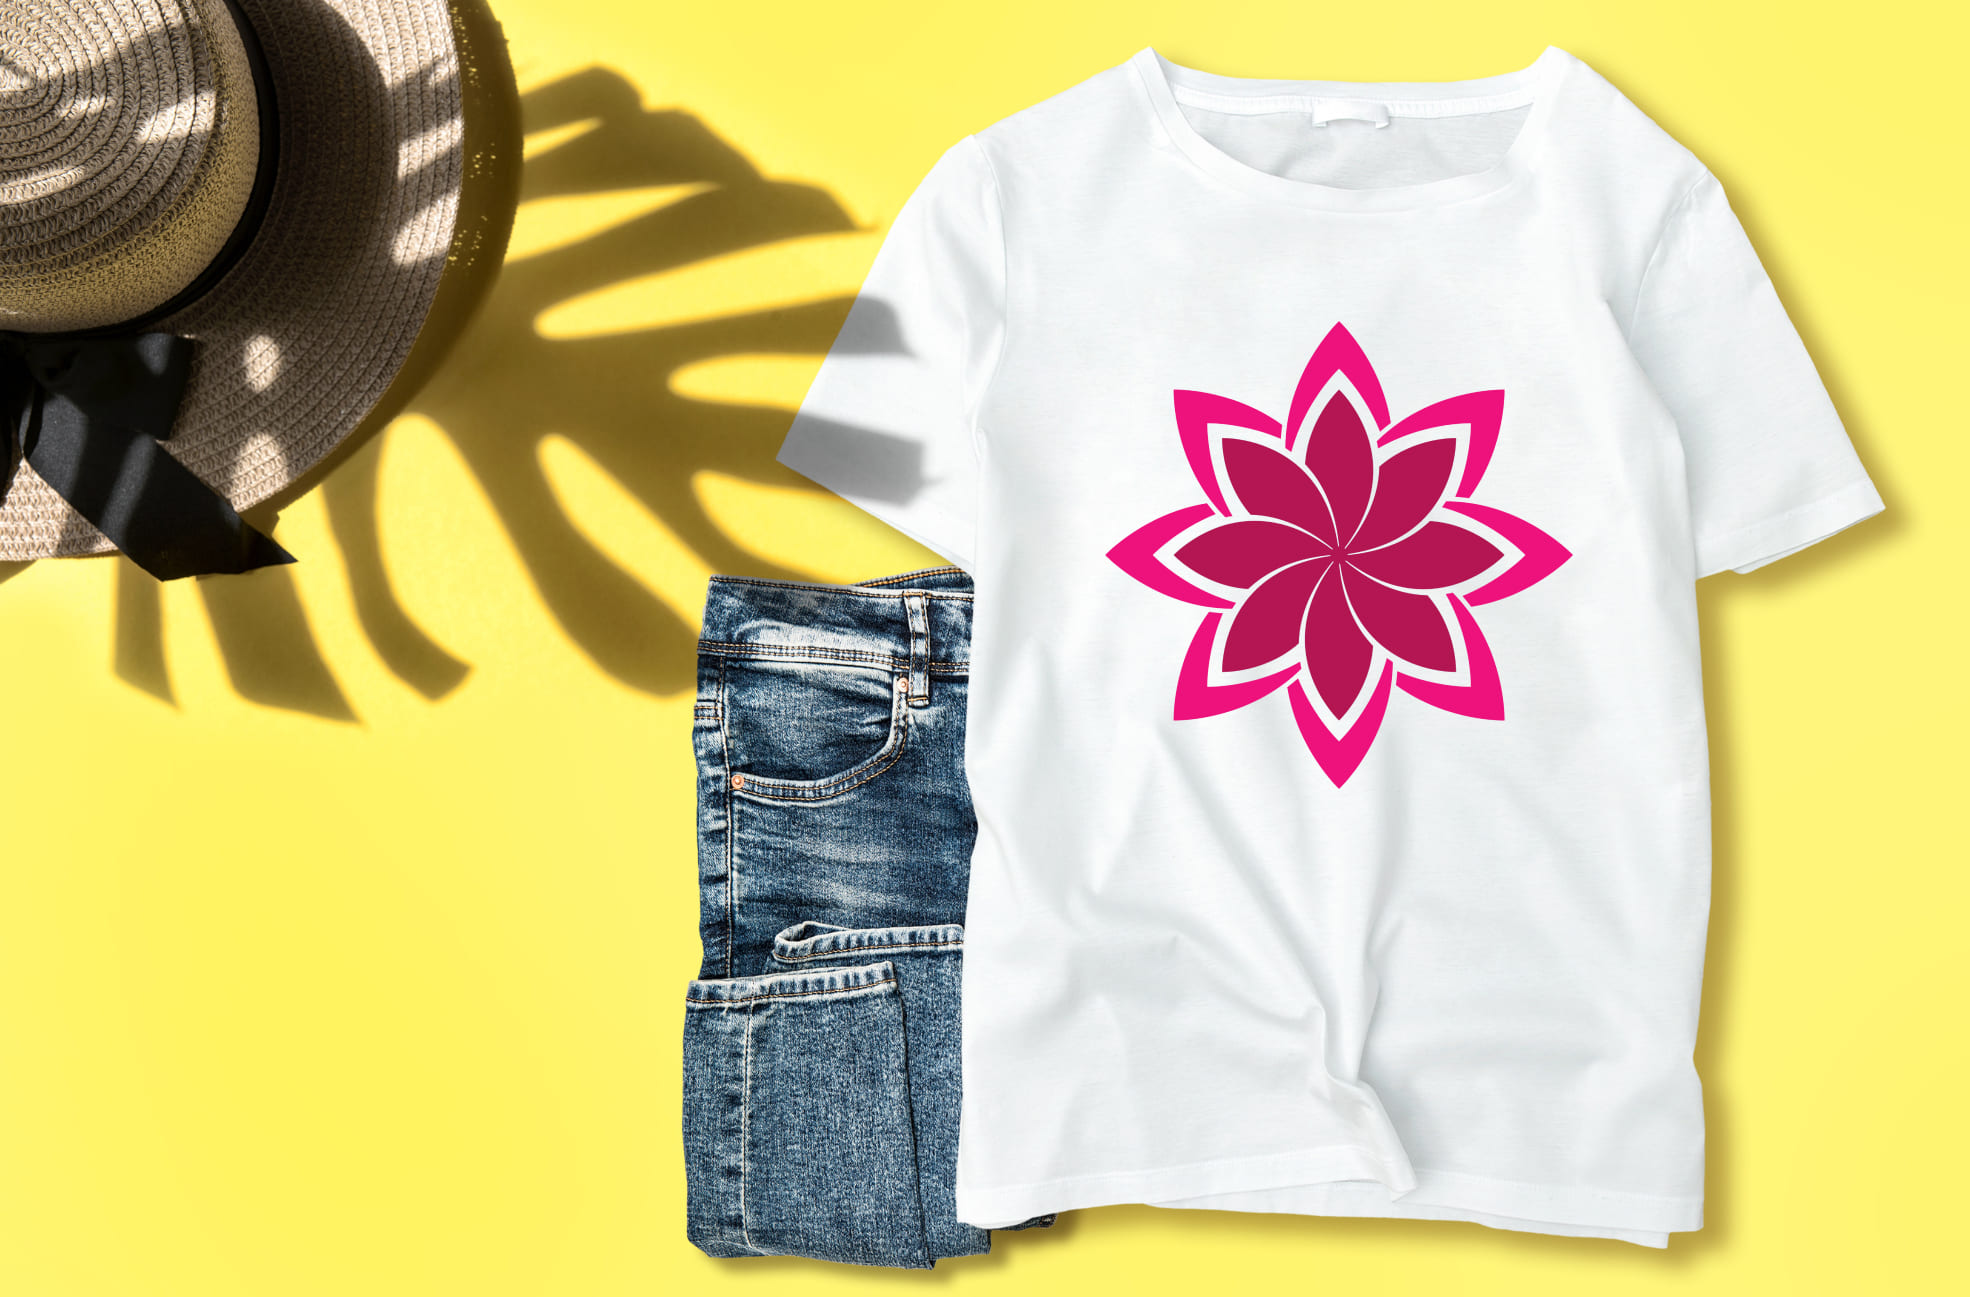 Classic white t-shirt with the red mandala.